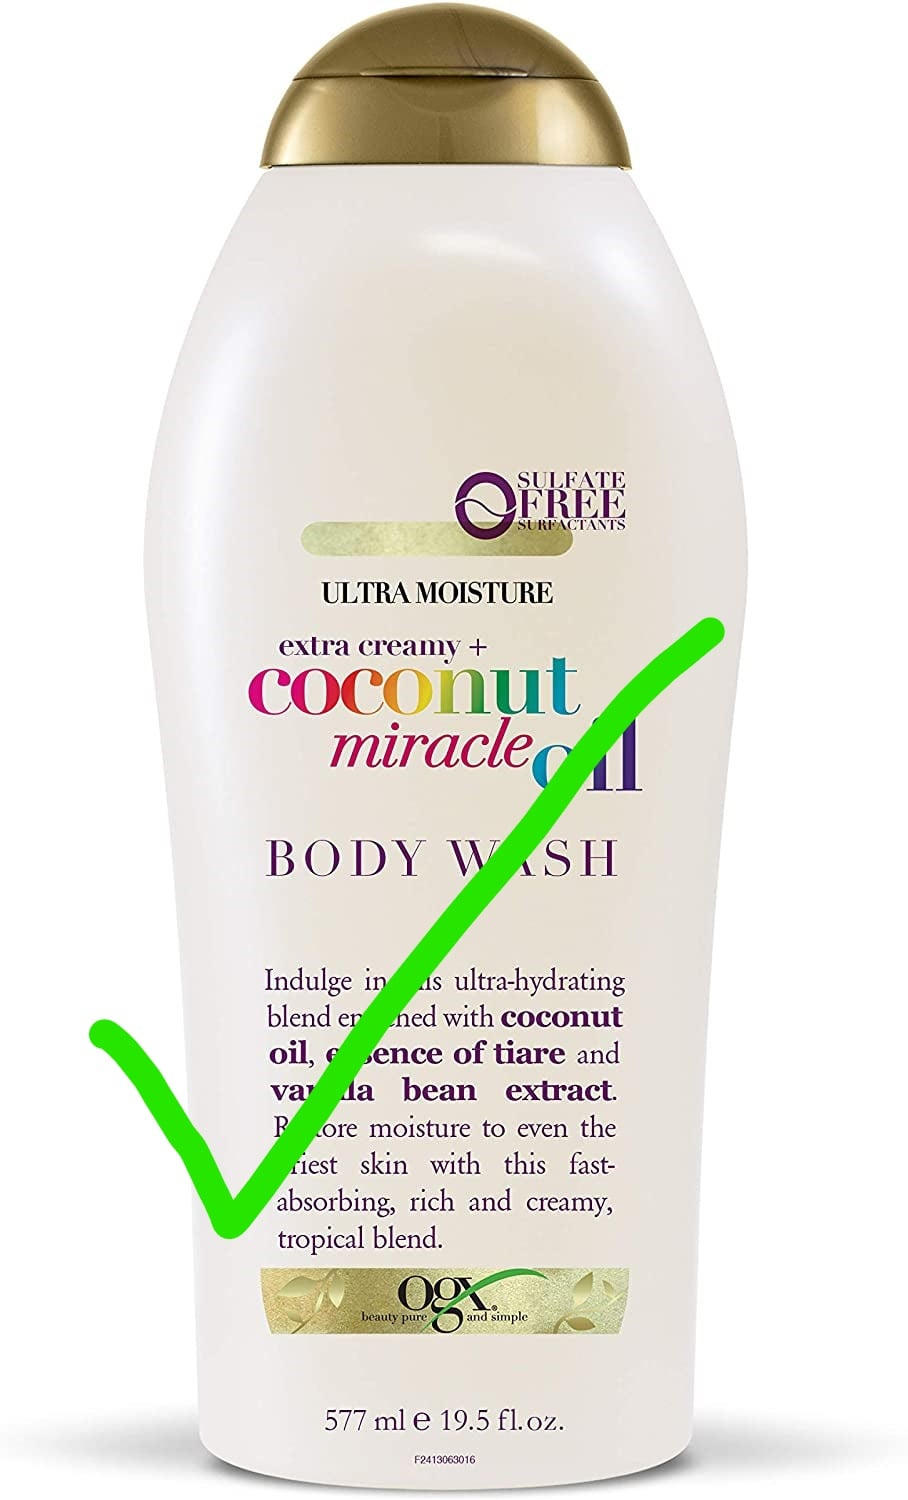 May be an image of one or more people, hair, cosmetics and text that says "FREE SURFACTANTS SULFATE FREF ULTRA MOISTURE coconut + extra creamy miracle BODY SH Indulge IS ultra-hydrating blend er ned with coconut oil, ence of tiare and va la bean extract. core moisture to even the riest skin with this fast- absorbing, rich and creamy, tropical blend. 577 ml e 19.5 fl.oz. fl. F2413063016"